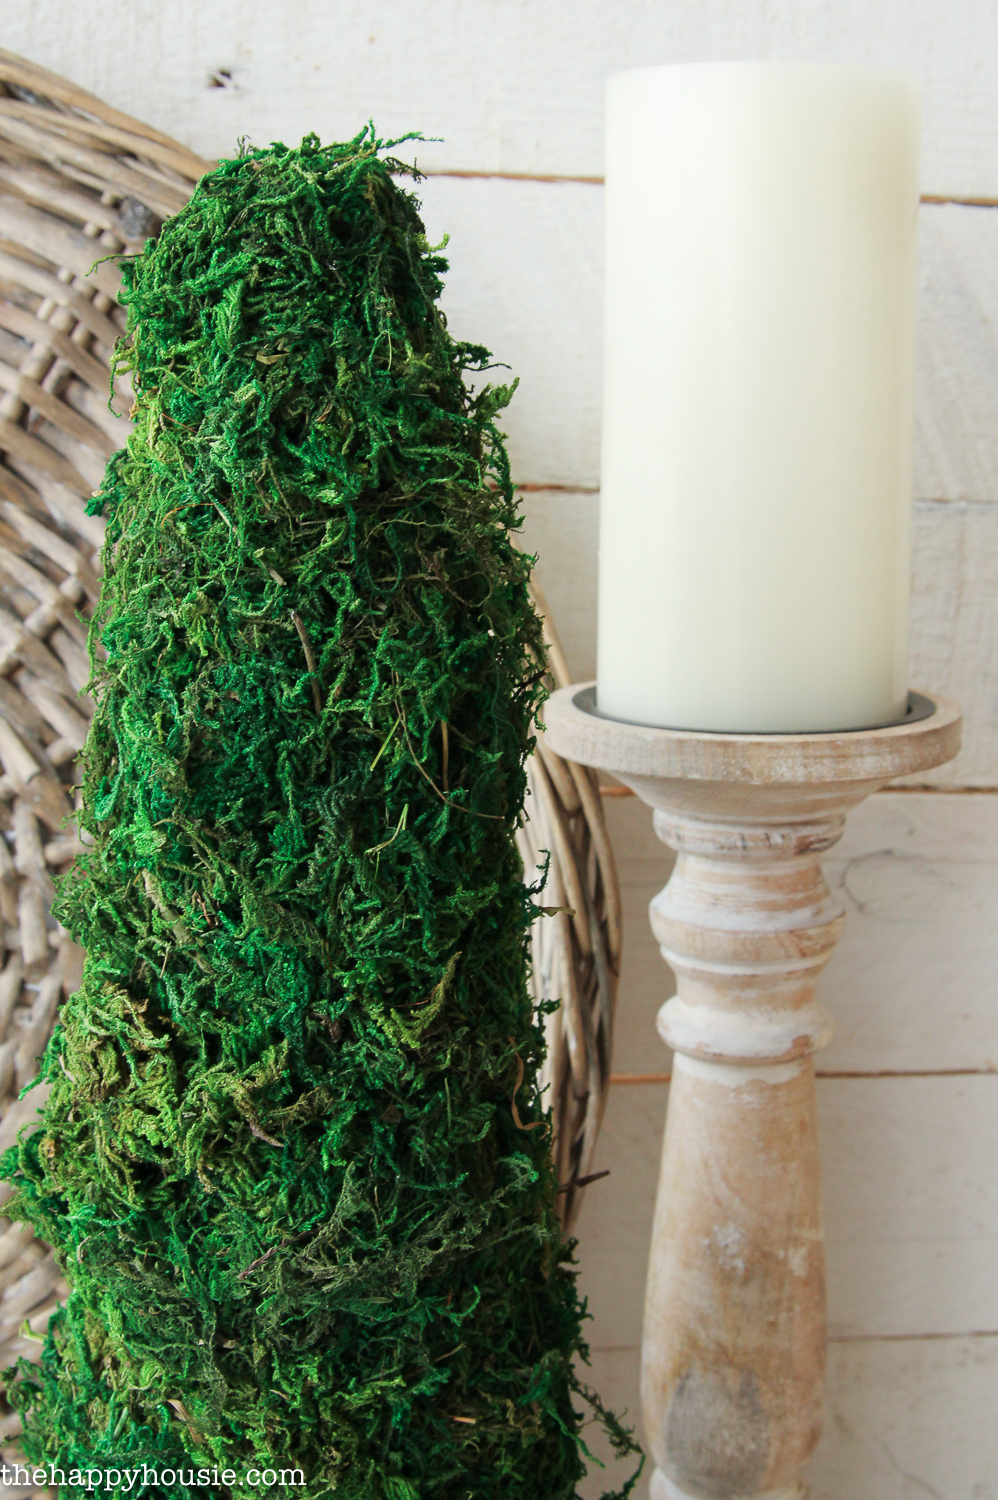 A candlestick and white candle beside the topiary.